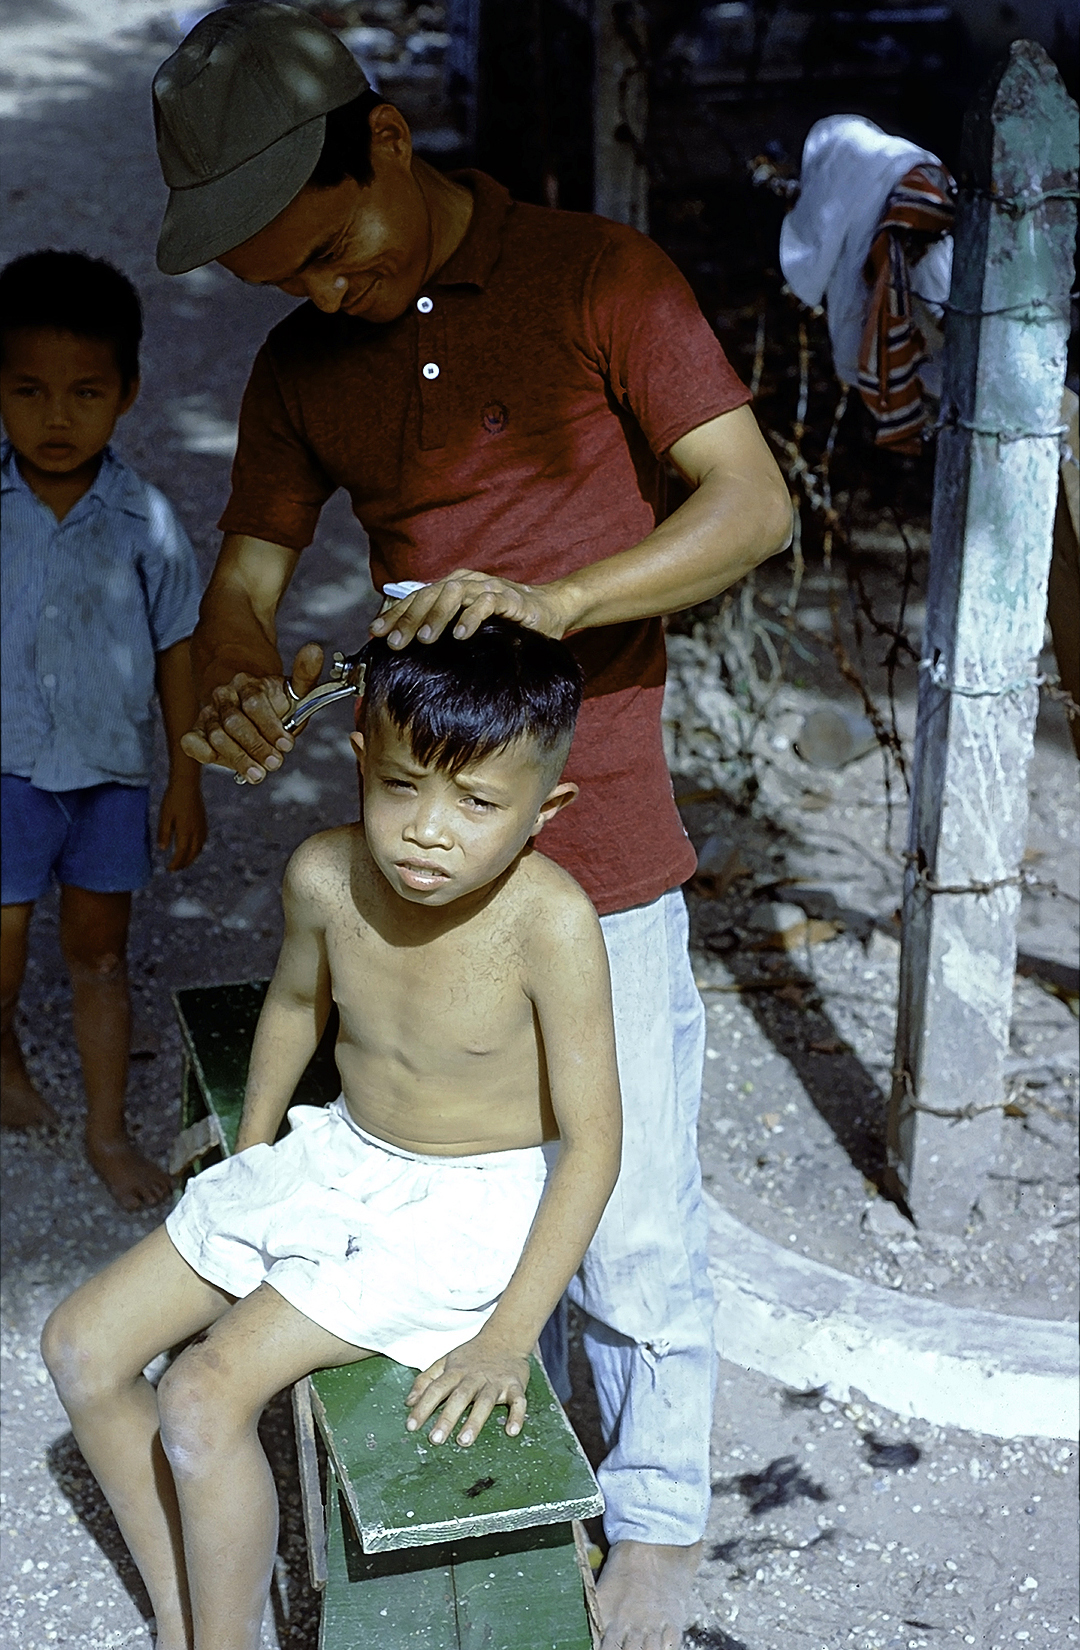 a boy getting his hair comb by an old barber